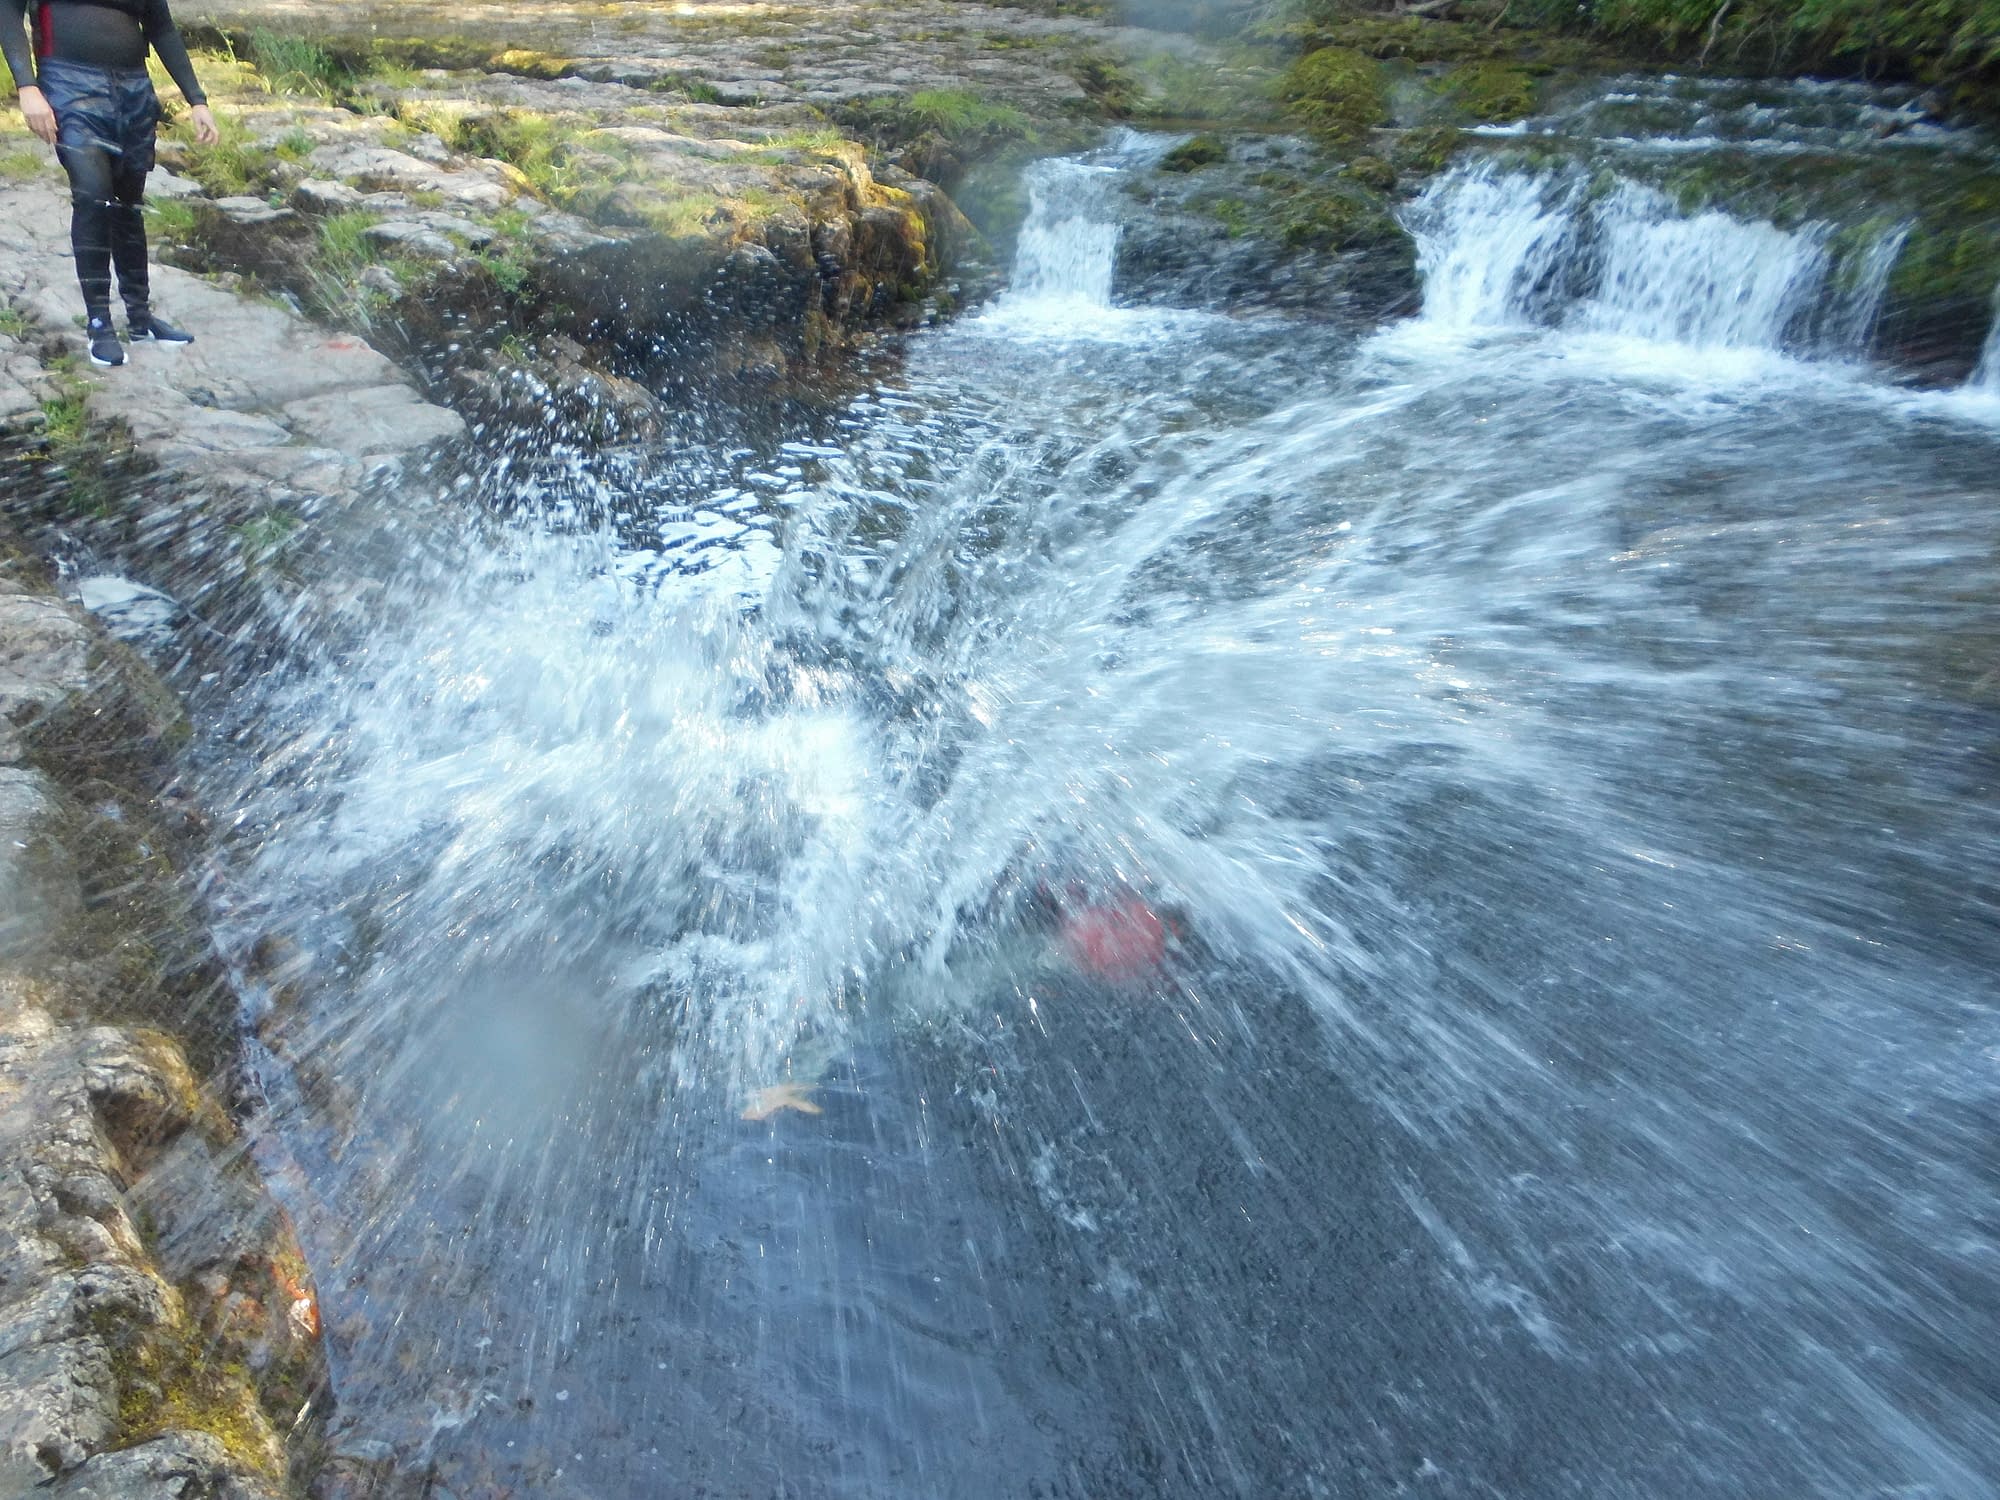 Wild swimming through white water in Brecon Beacons National Park